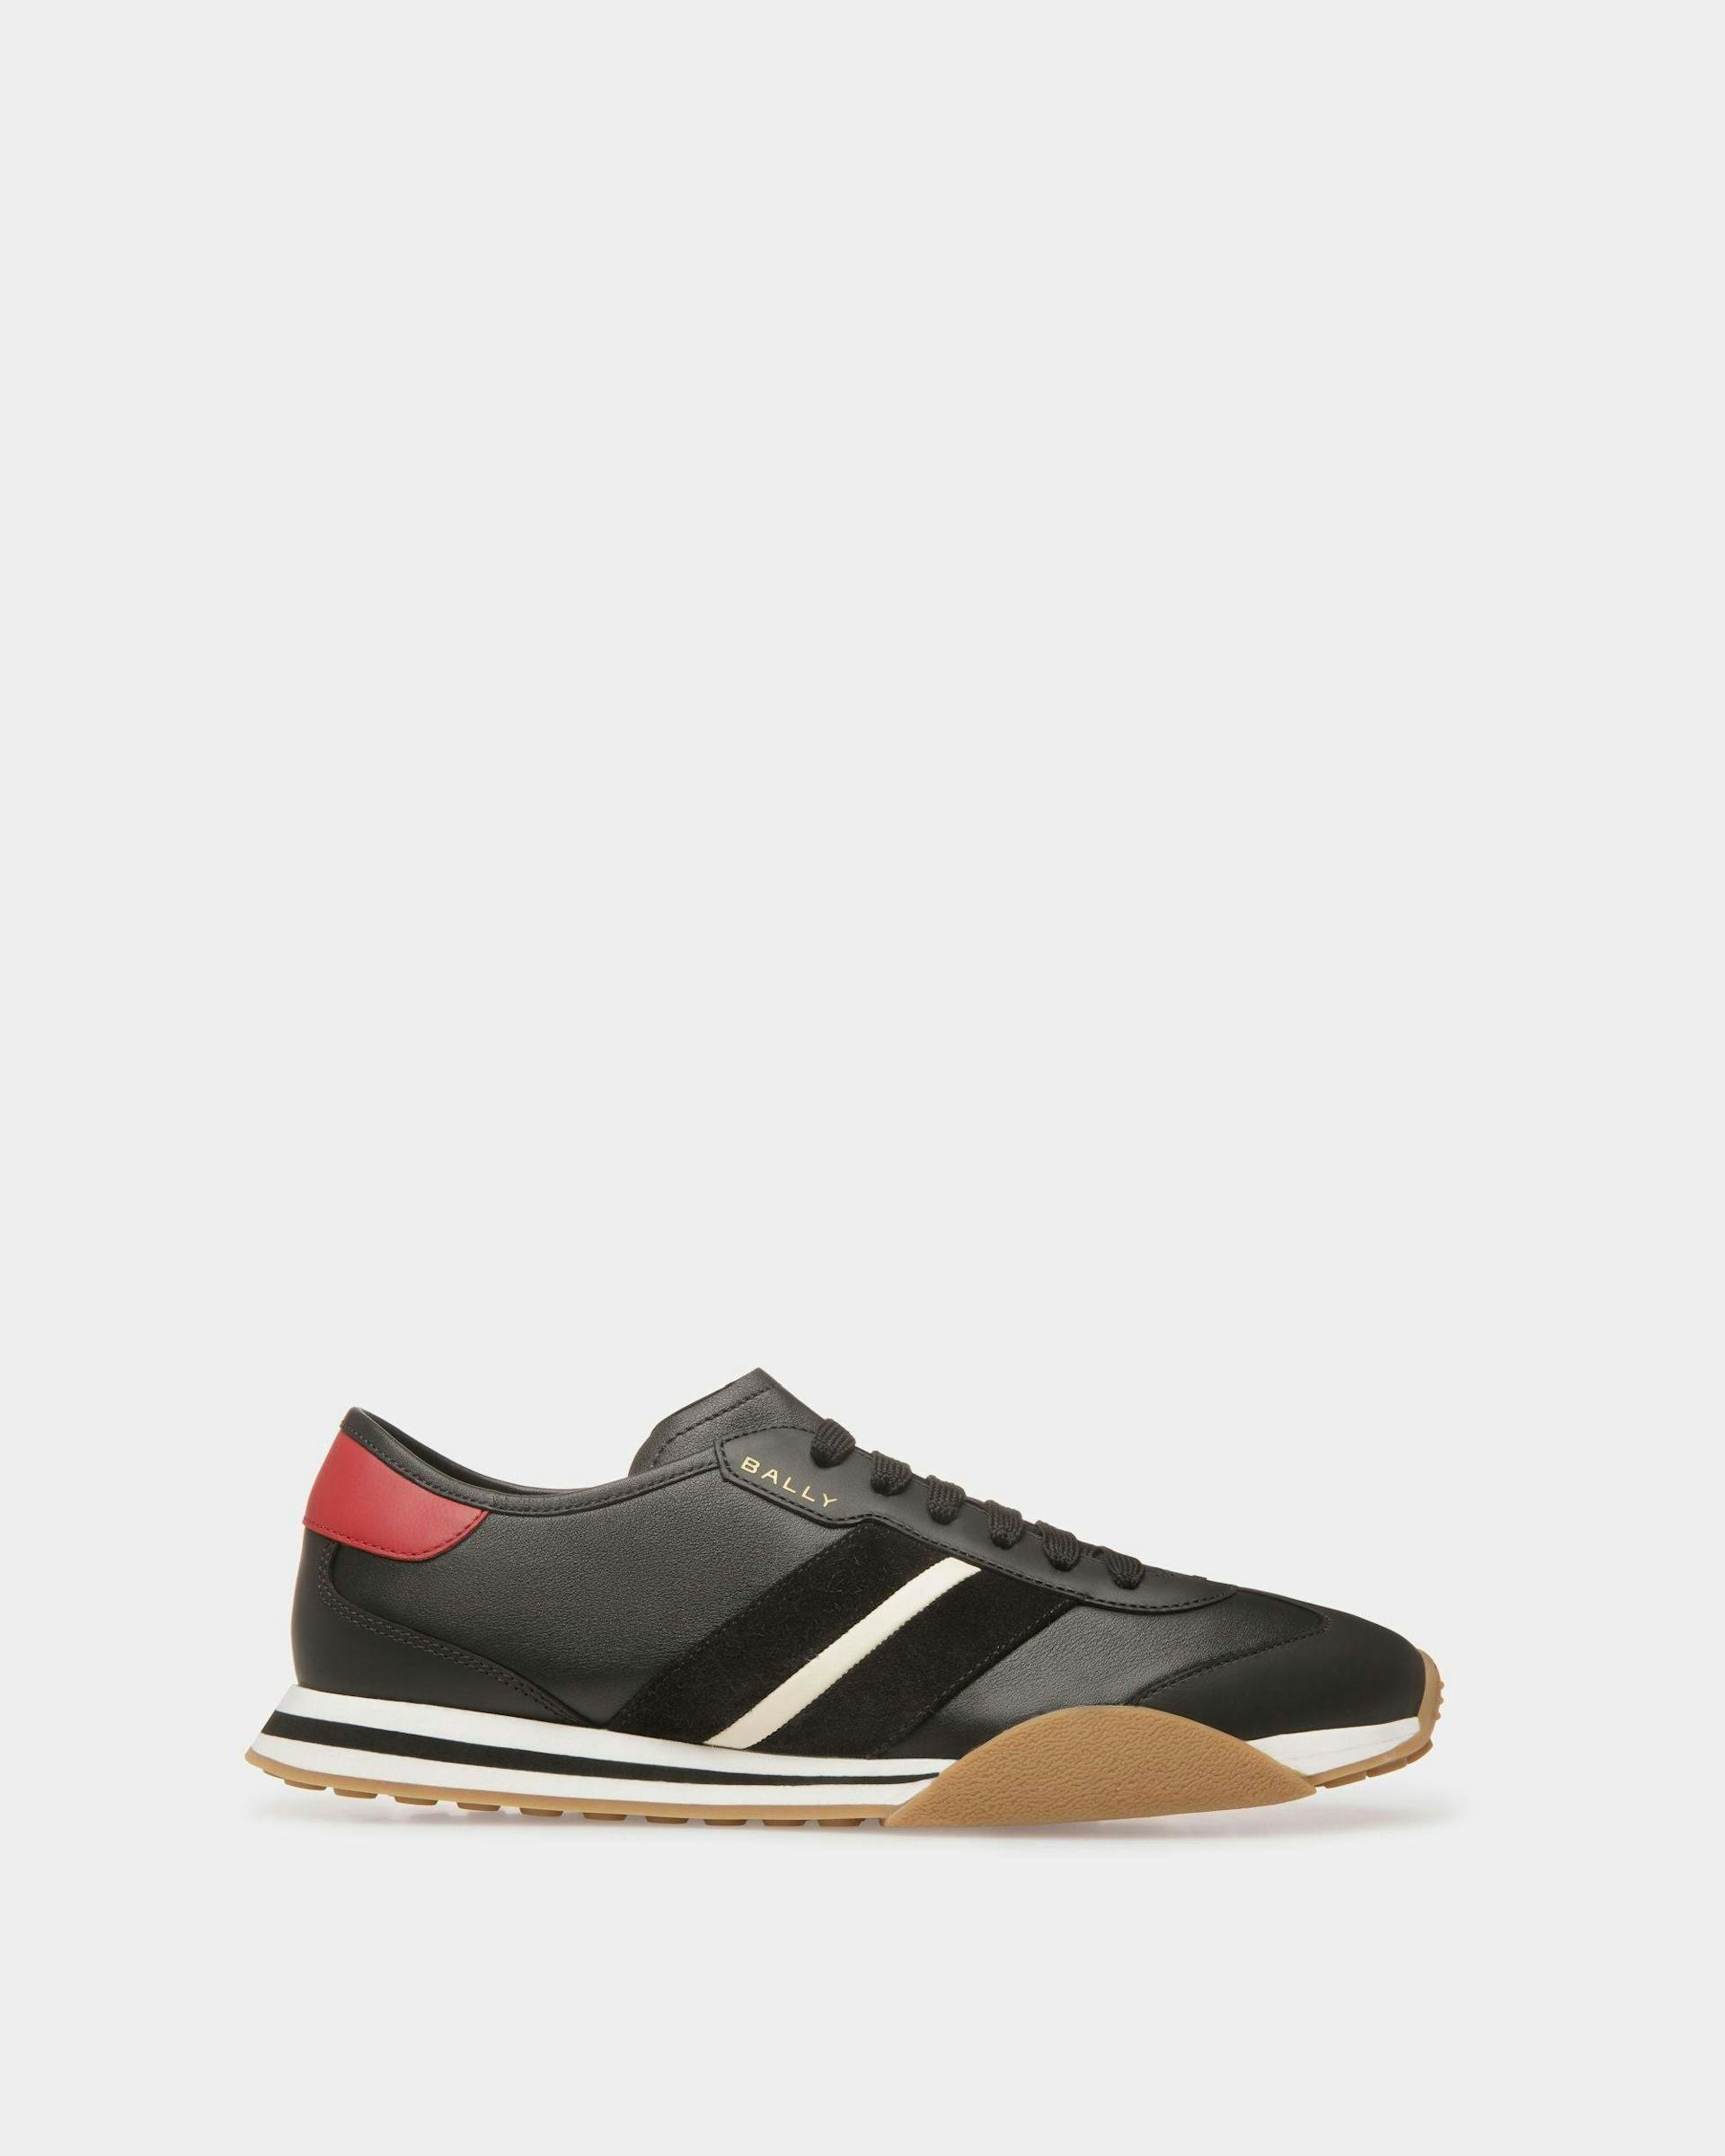 Men's Sussex Sneakers In Black, Bone And Deep Ruby Leather | Bally | Still Life Side